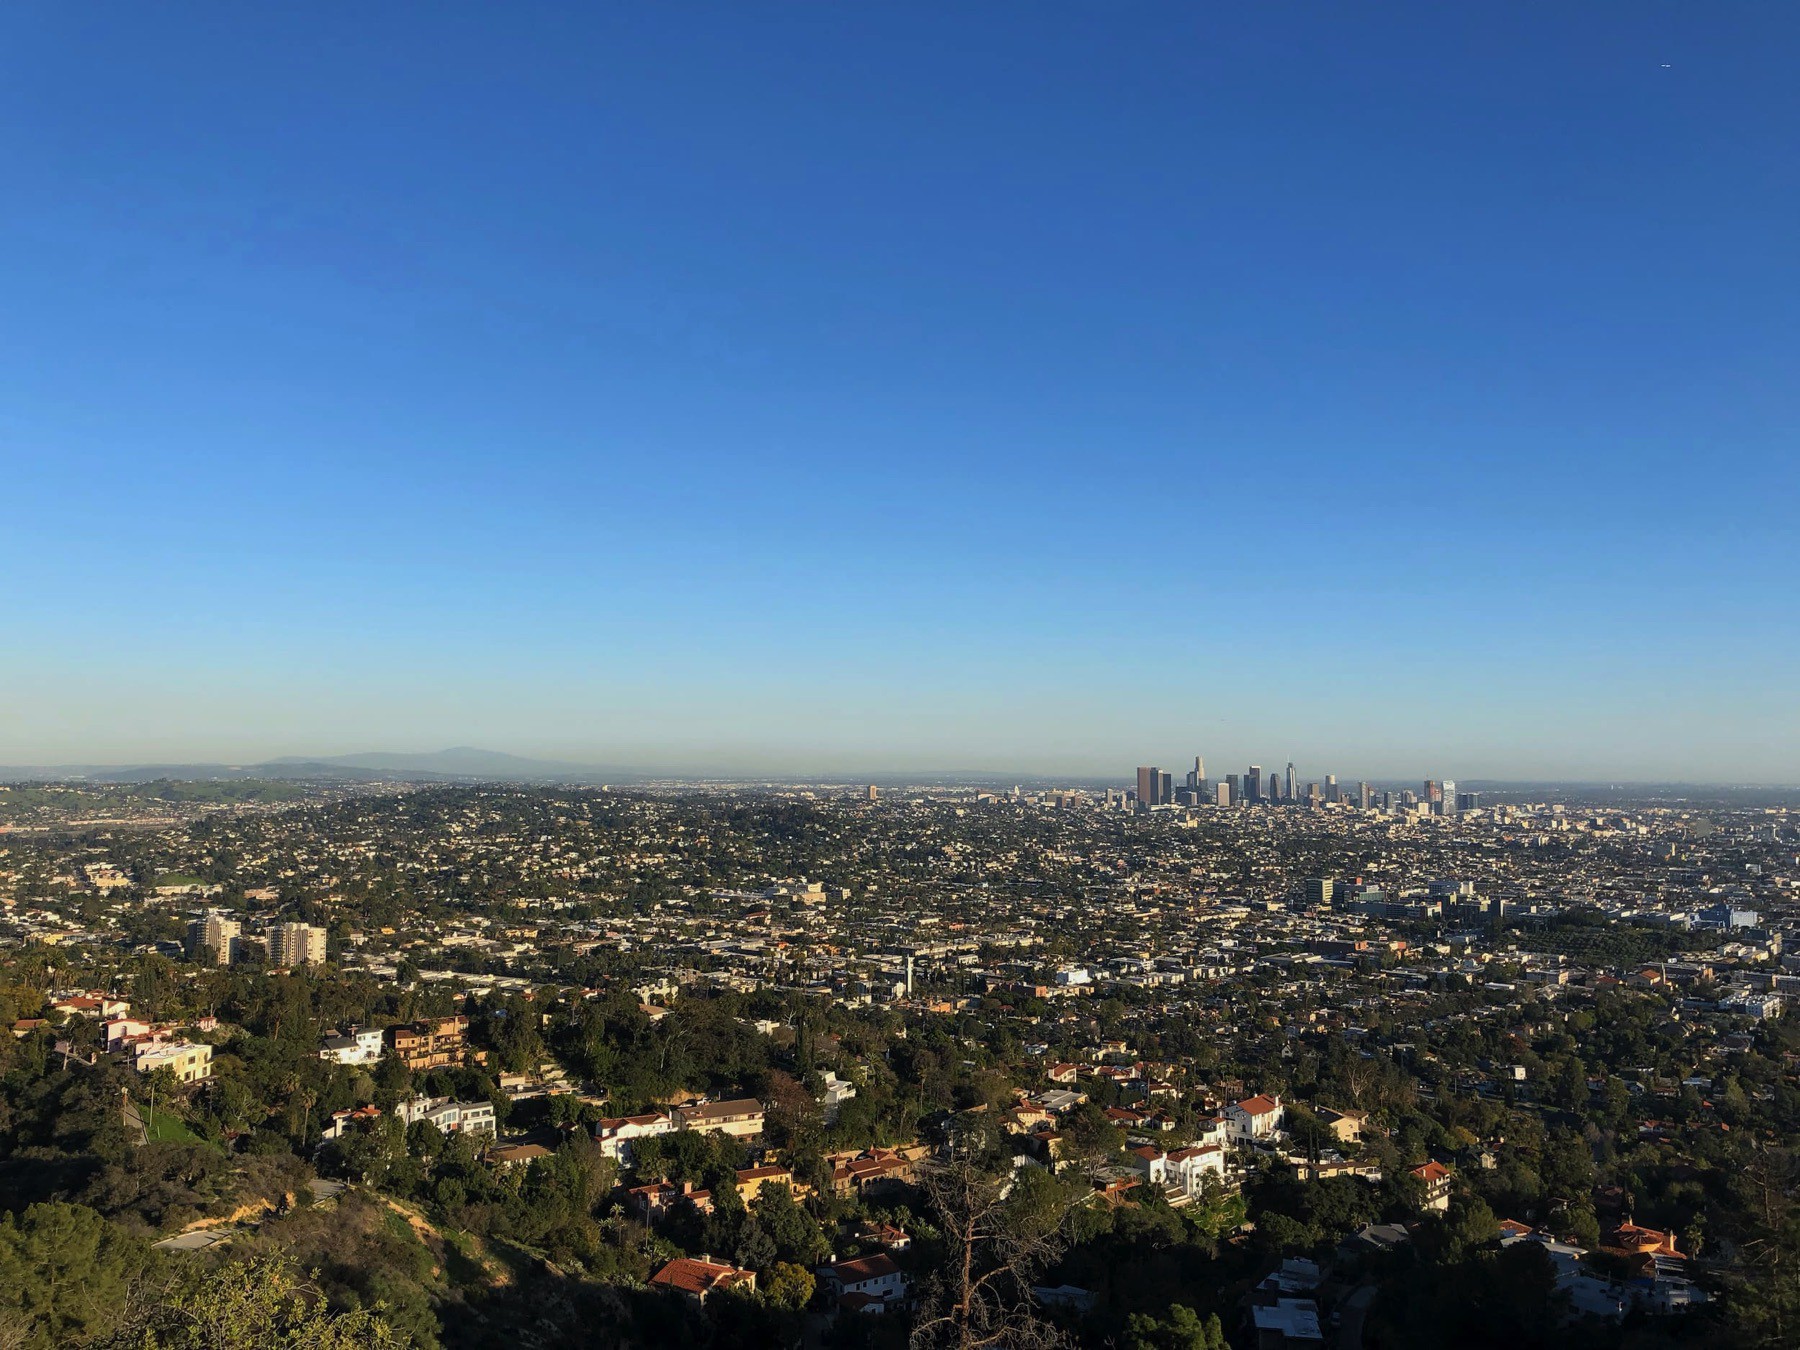 An image of the Los Angeles skyline taken from the Griffith Observatory.